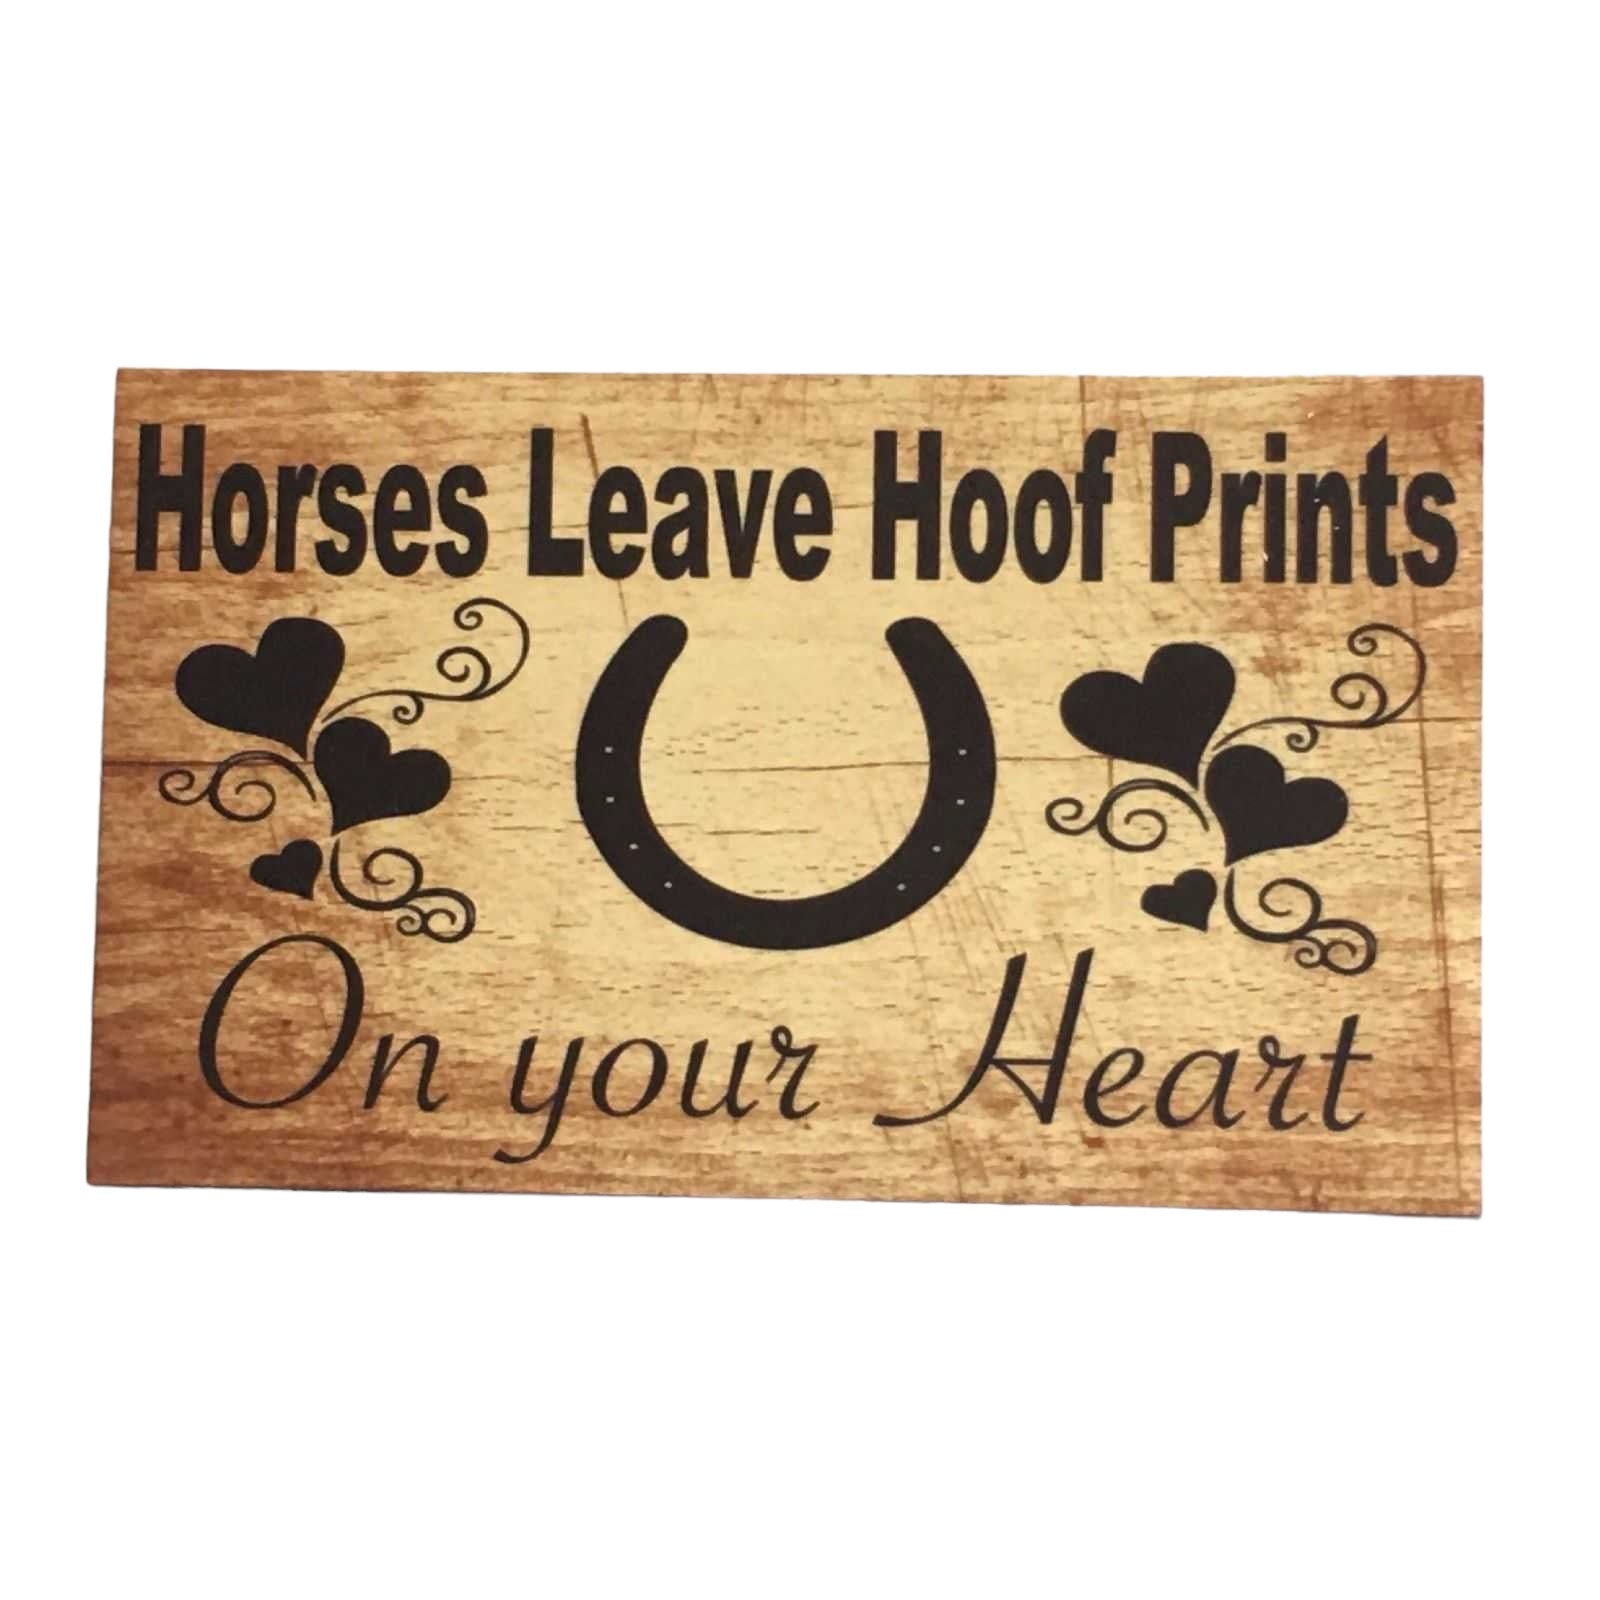 Horses Hoof Prints Heart Horse Sign - The Renmy Store Homewares & Gifts 